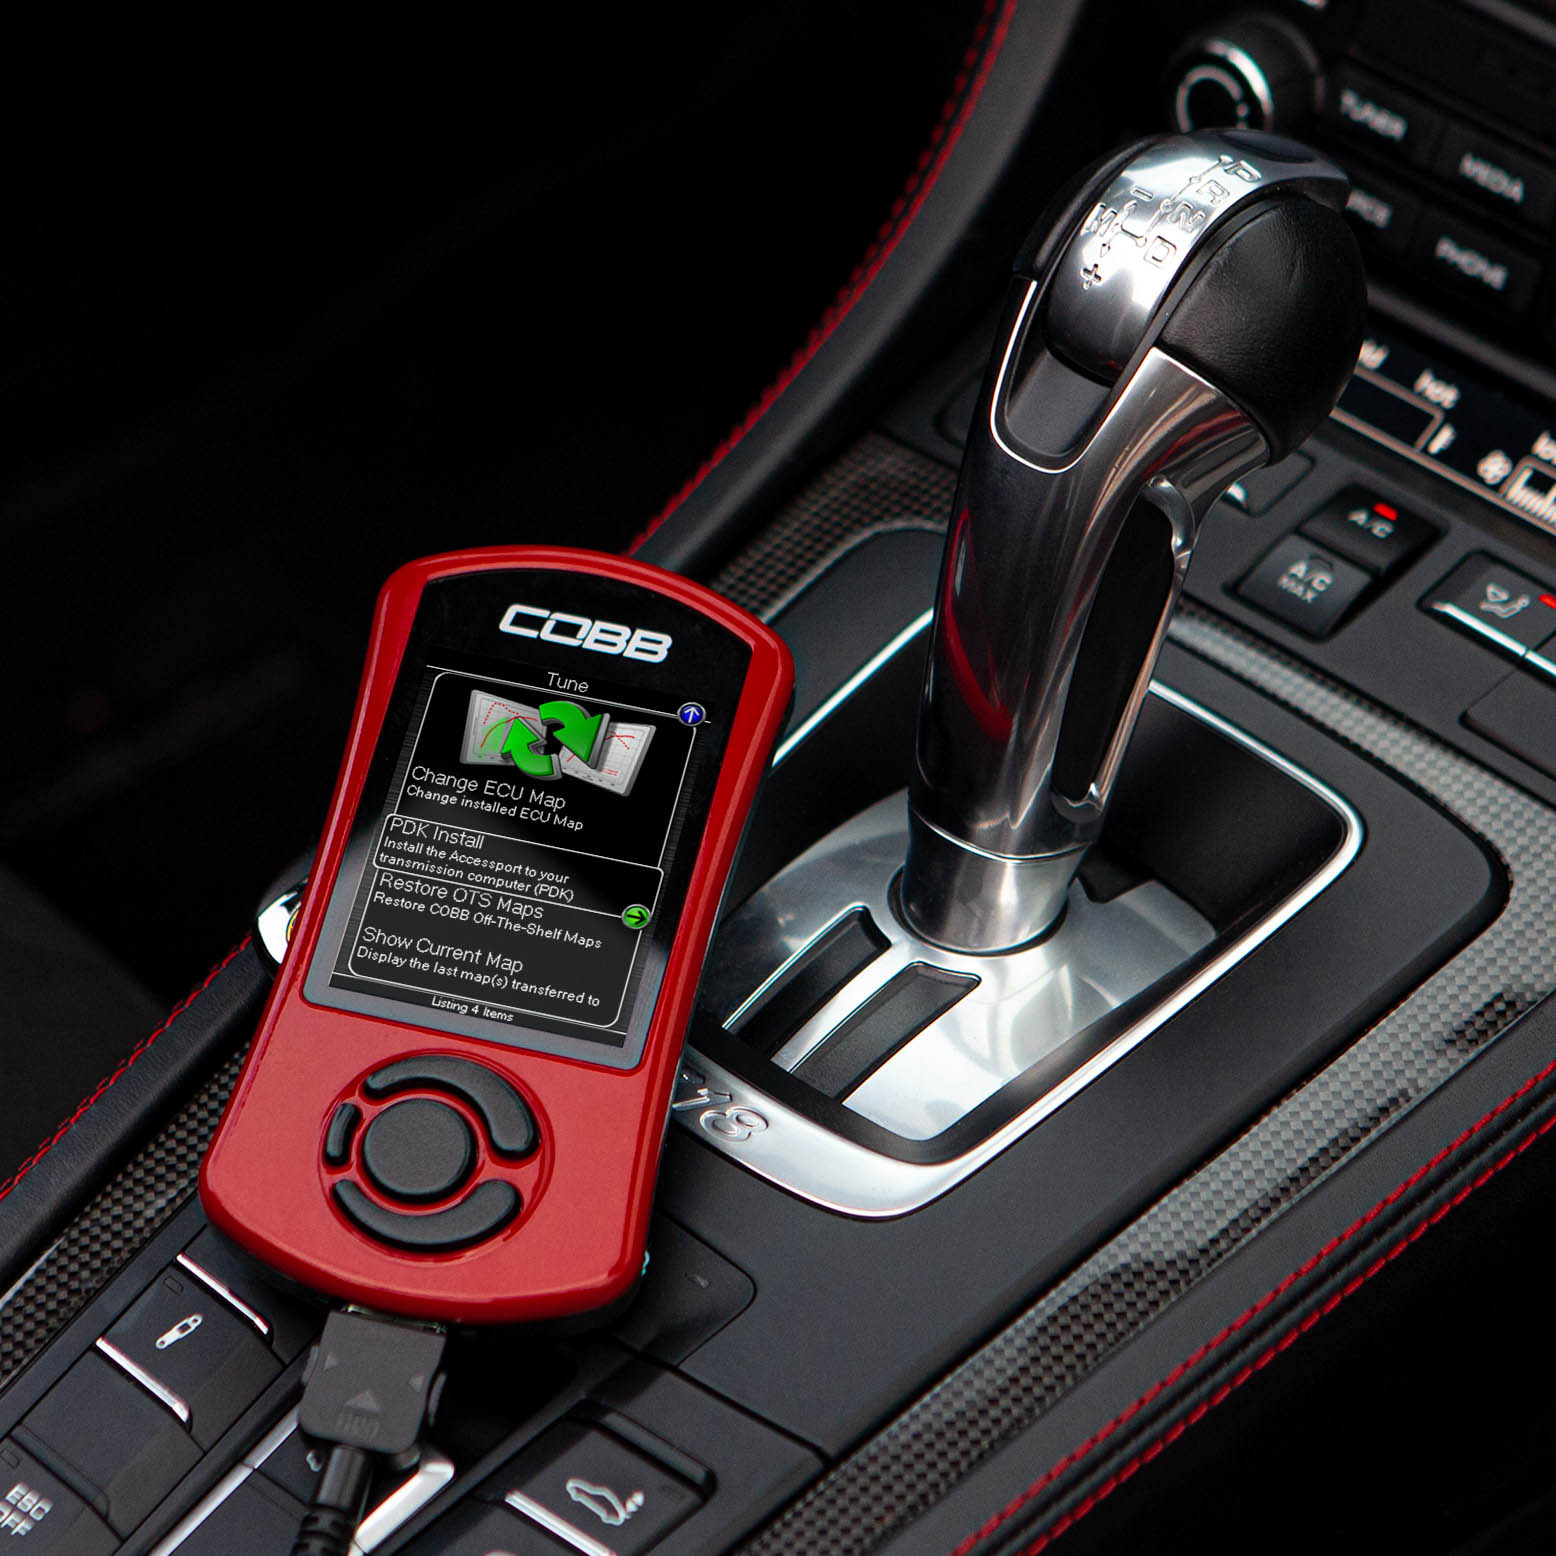 Accessport with PDK Flashing for Porsche 911 991.2 Turbo / Turbo S (Update to PDK Flashing)